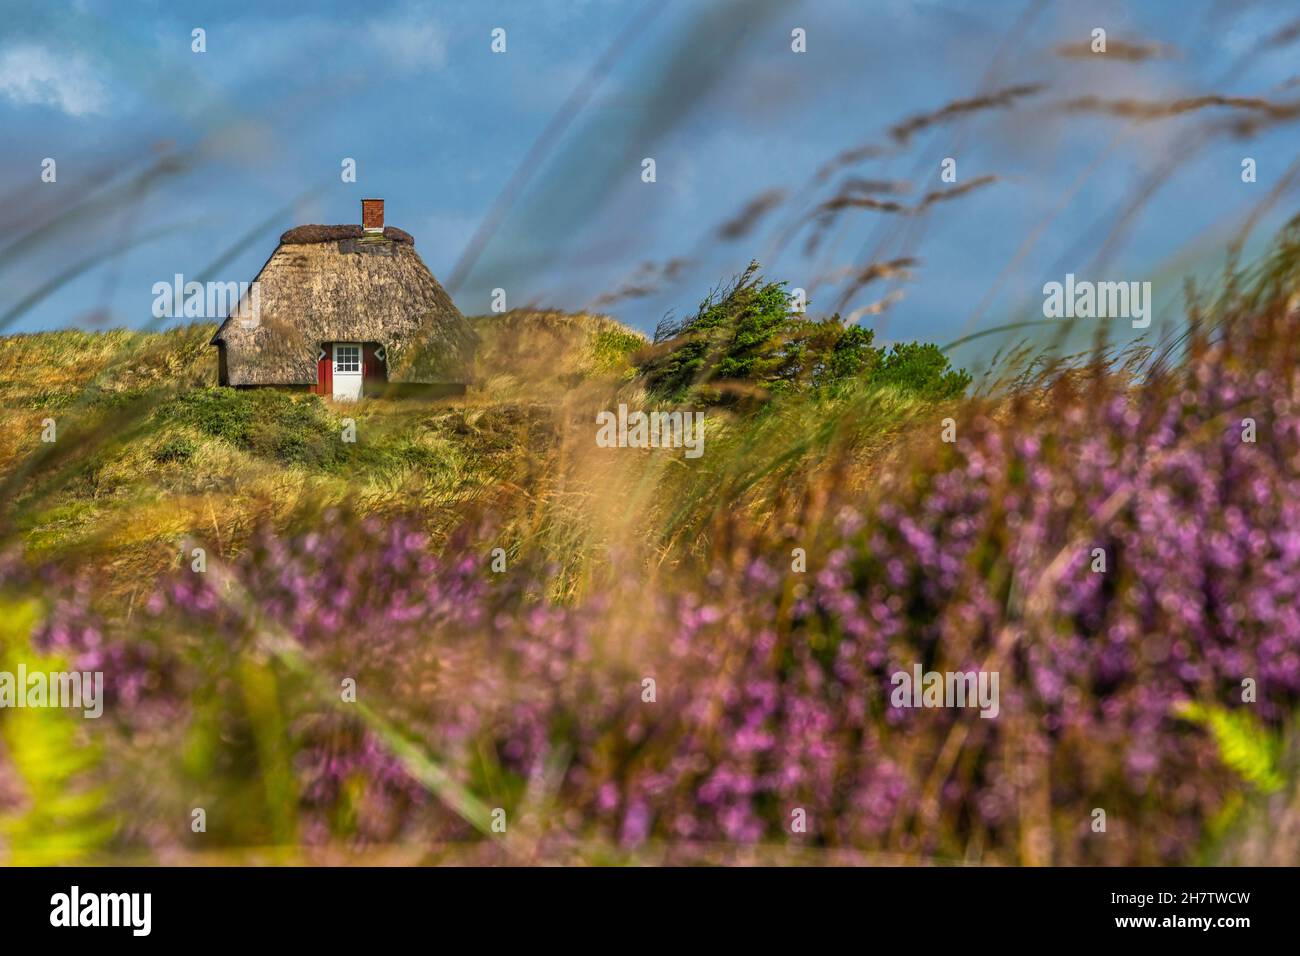 Traditional thatched fisherman's house in the Nymindegab dunes with wild heather flowers. Southwest Jutland, Denmark, Europe Stock Photo